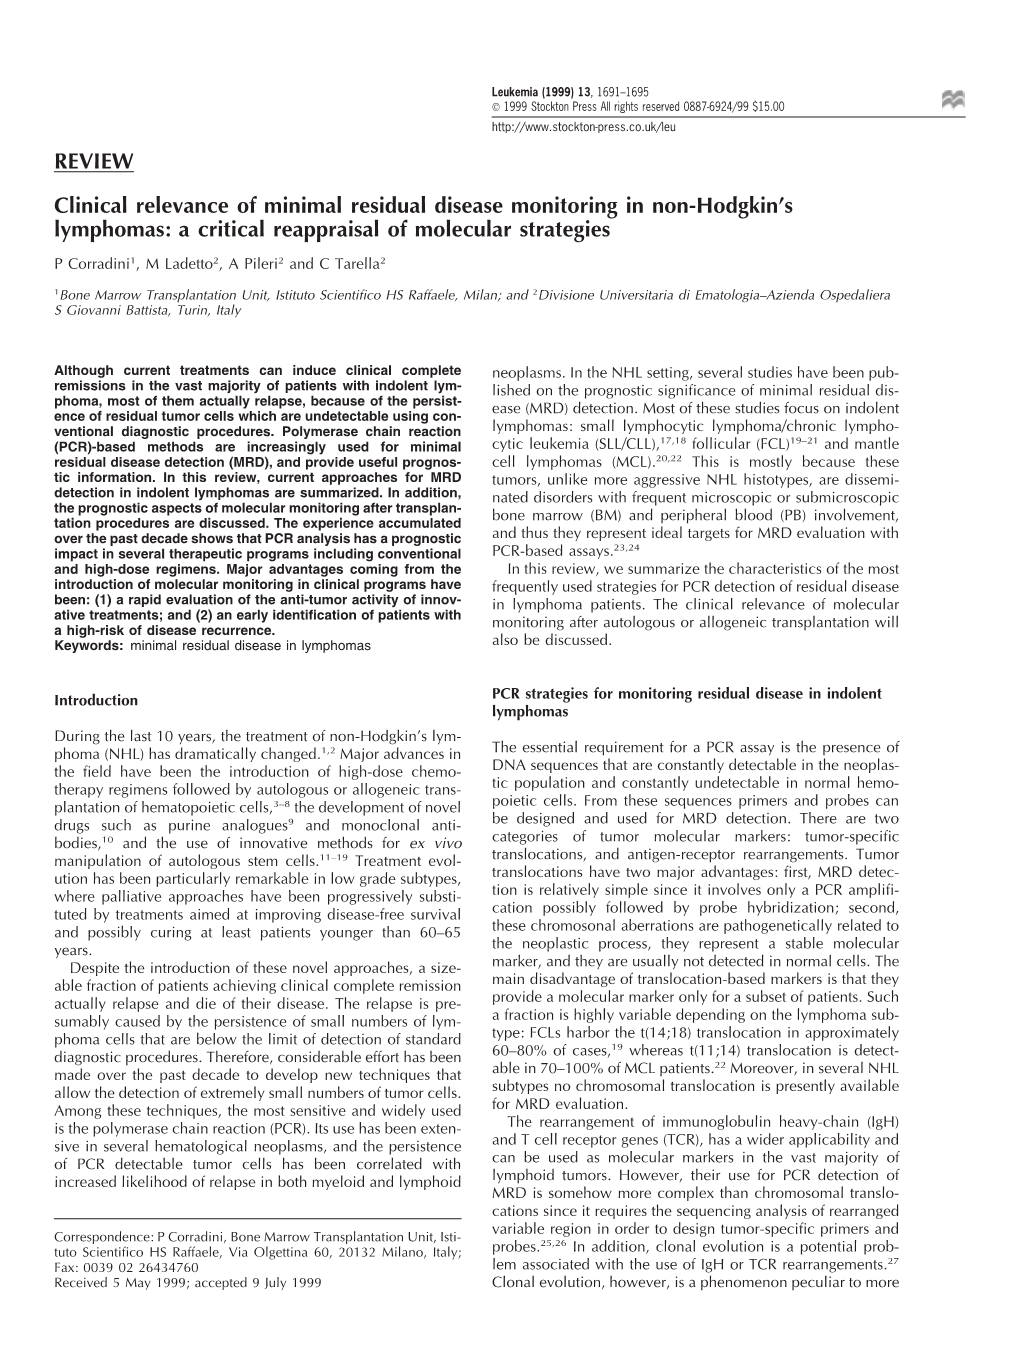 REVIEW Clinical Relevance of Minimal Residual Disease Monitoring in Non